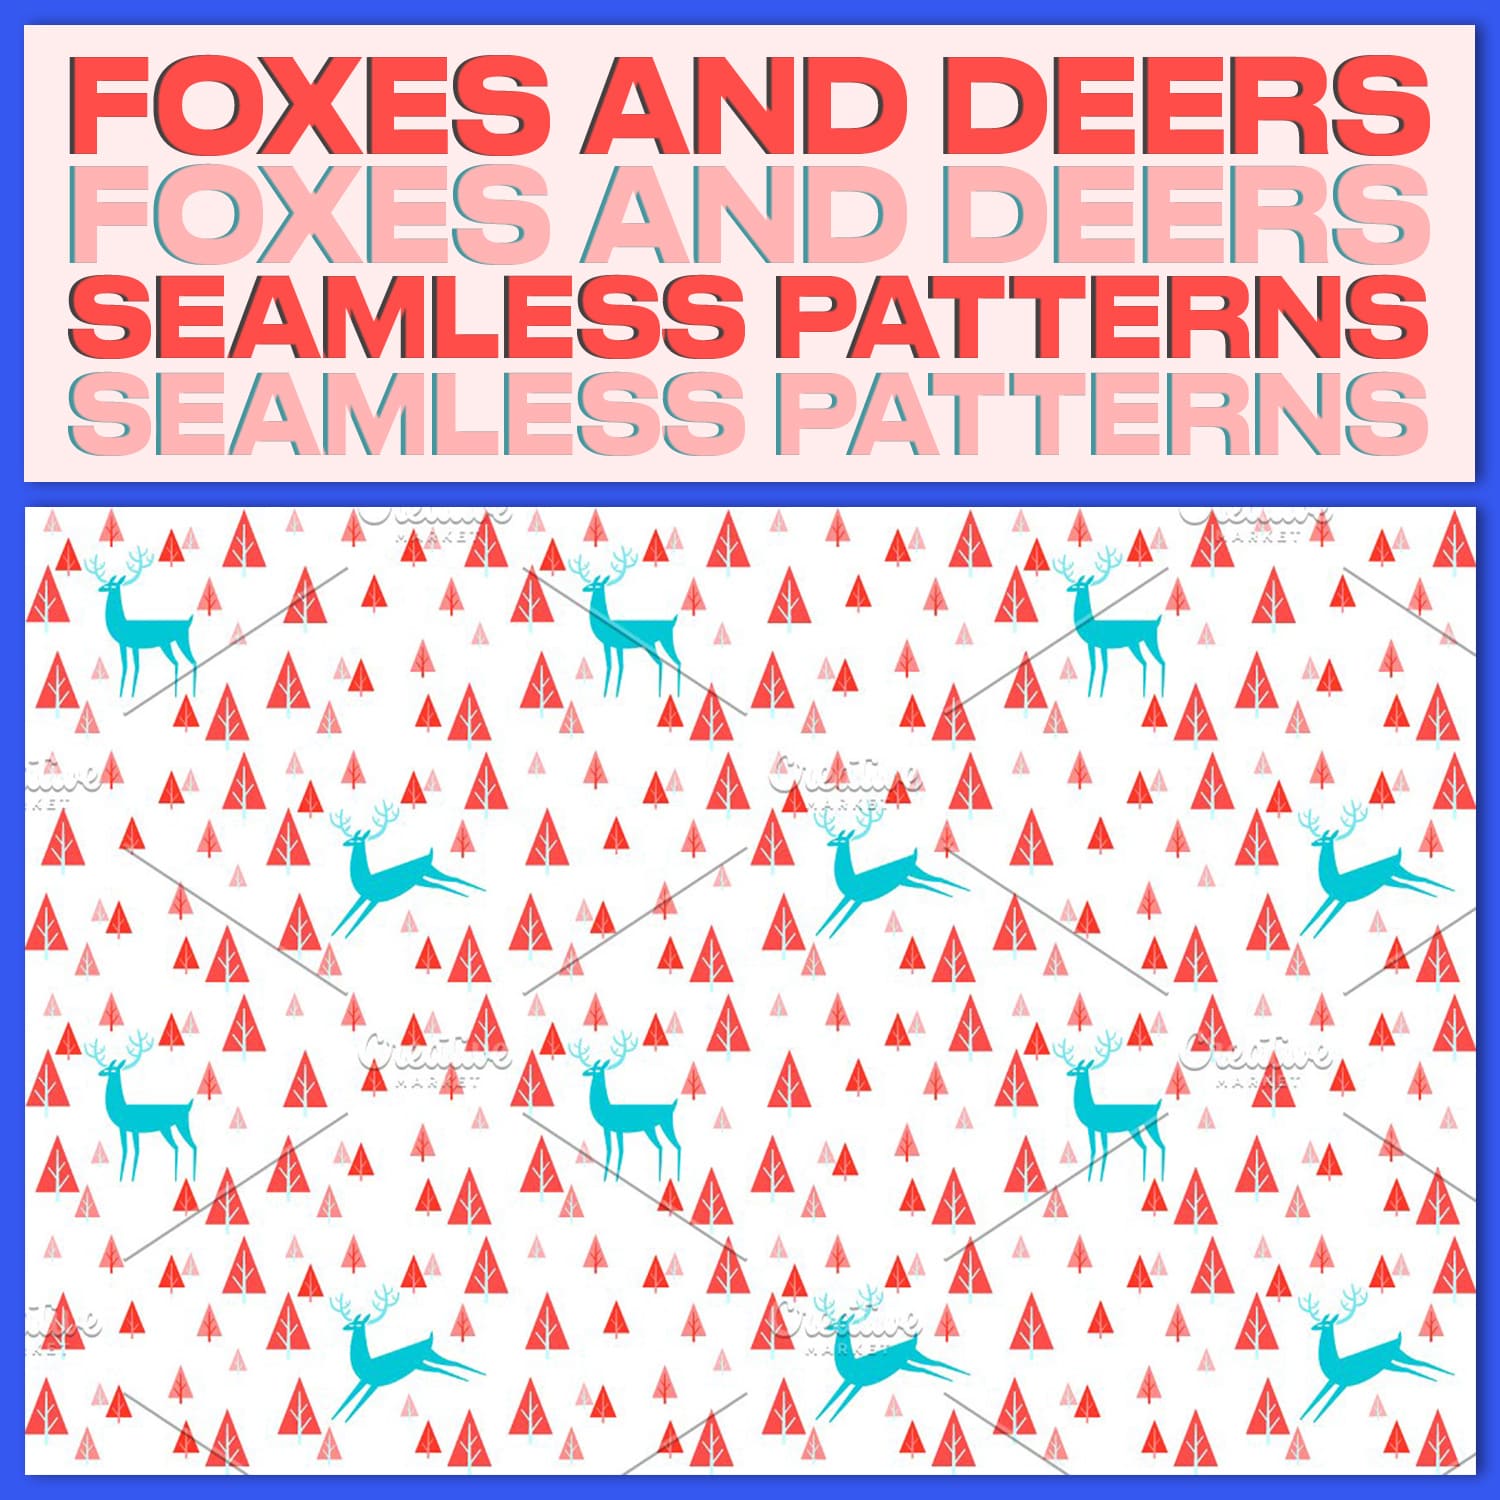 8 foxes and deers seamless patterns.